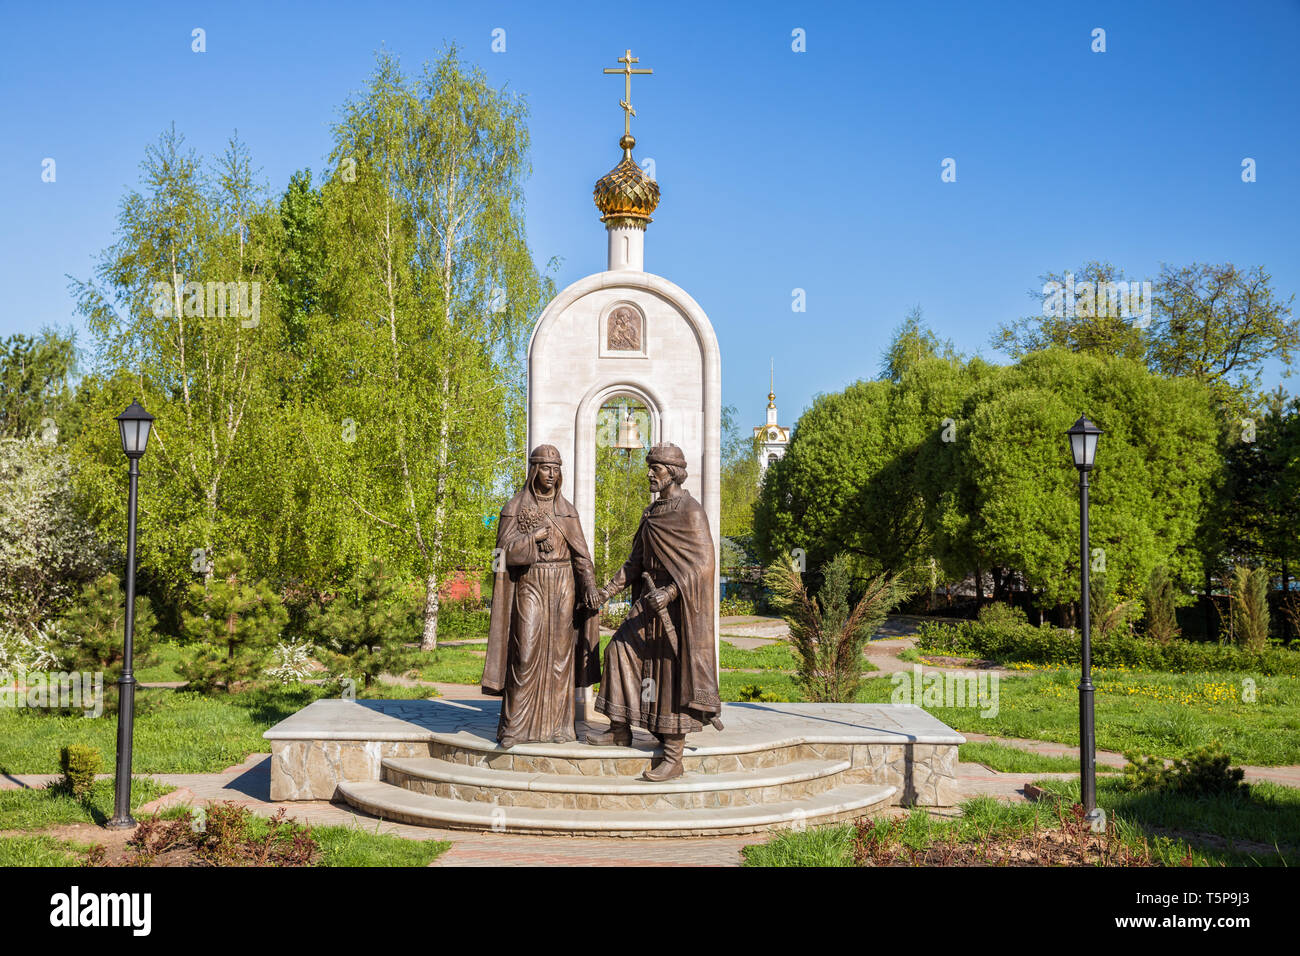 DMITROV, RUSSIA - MAY 10, 2018: Monument to Russian saints Peter and Fevronia in Dmitrov was installed in 2015 sculptor Y. Khmelevskoy. Saints Peter a Stock Photo